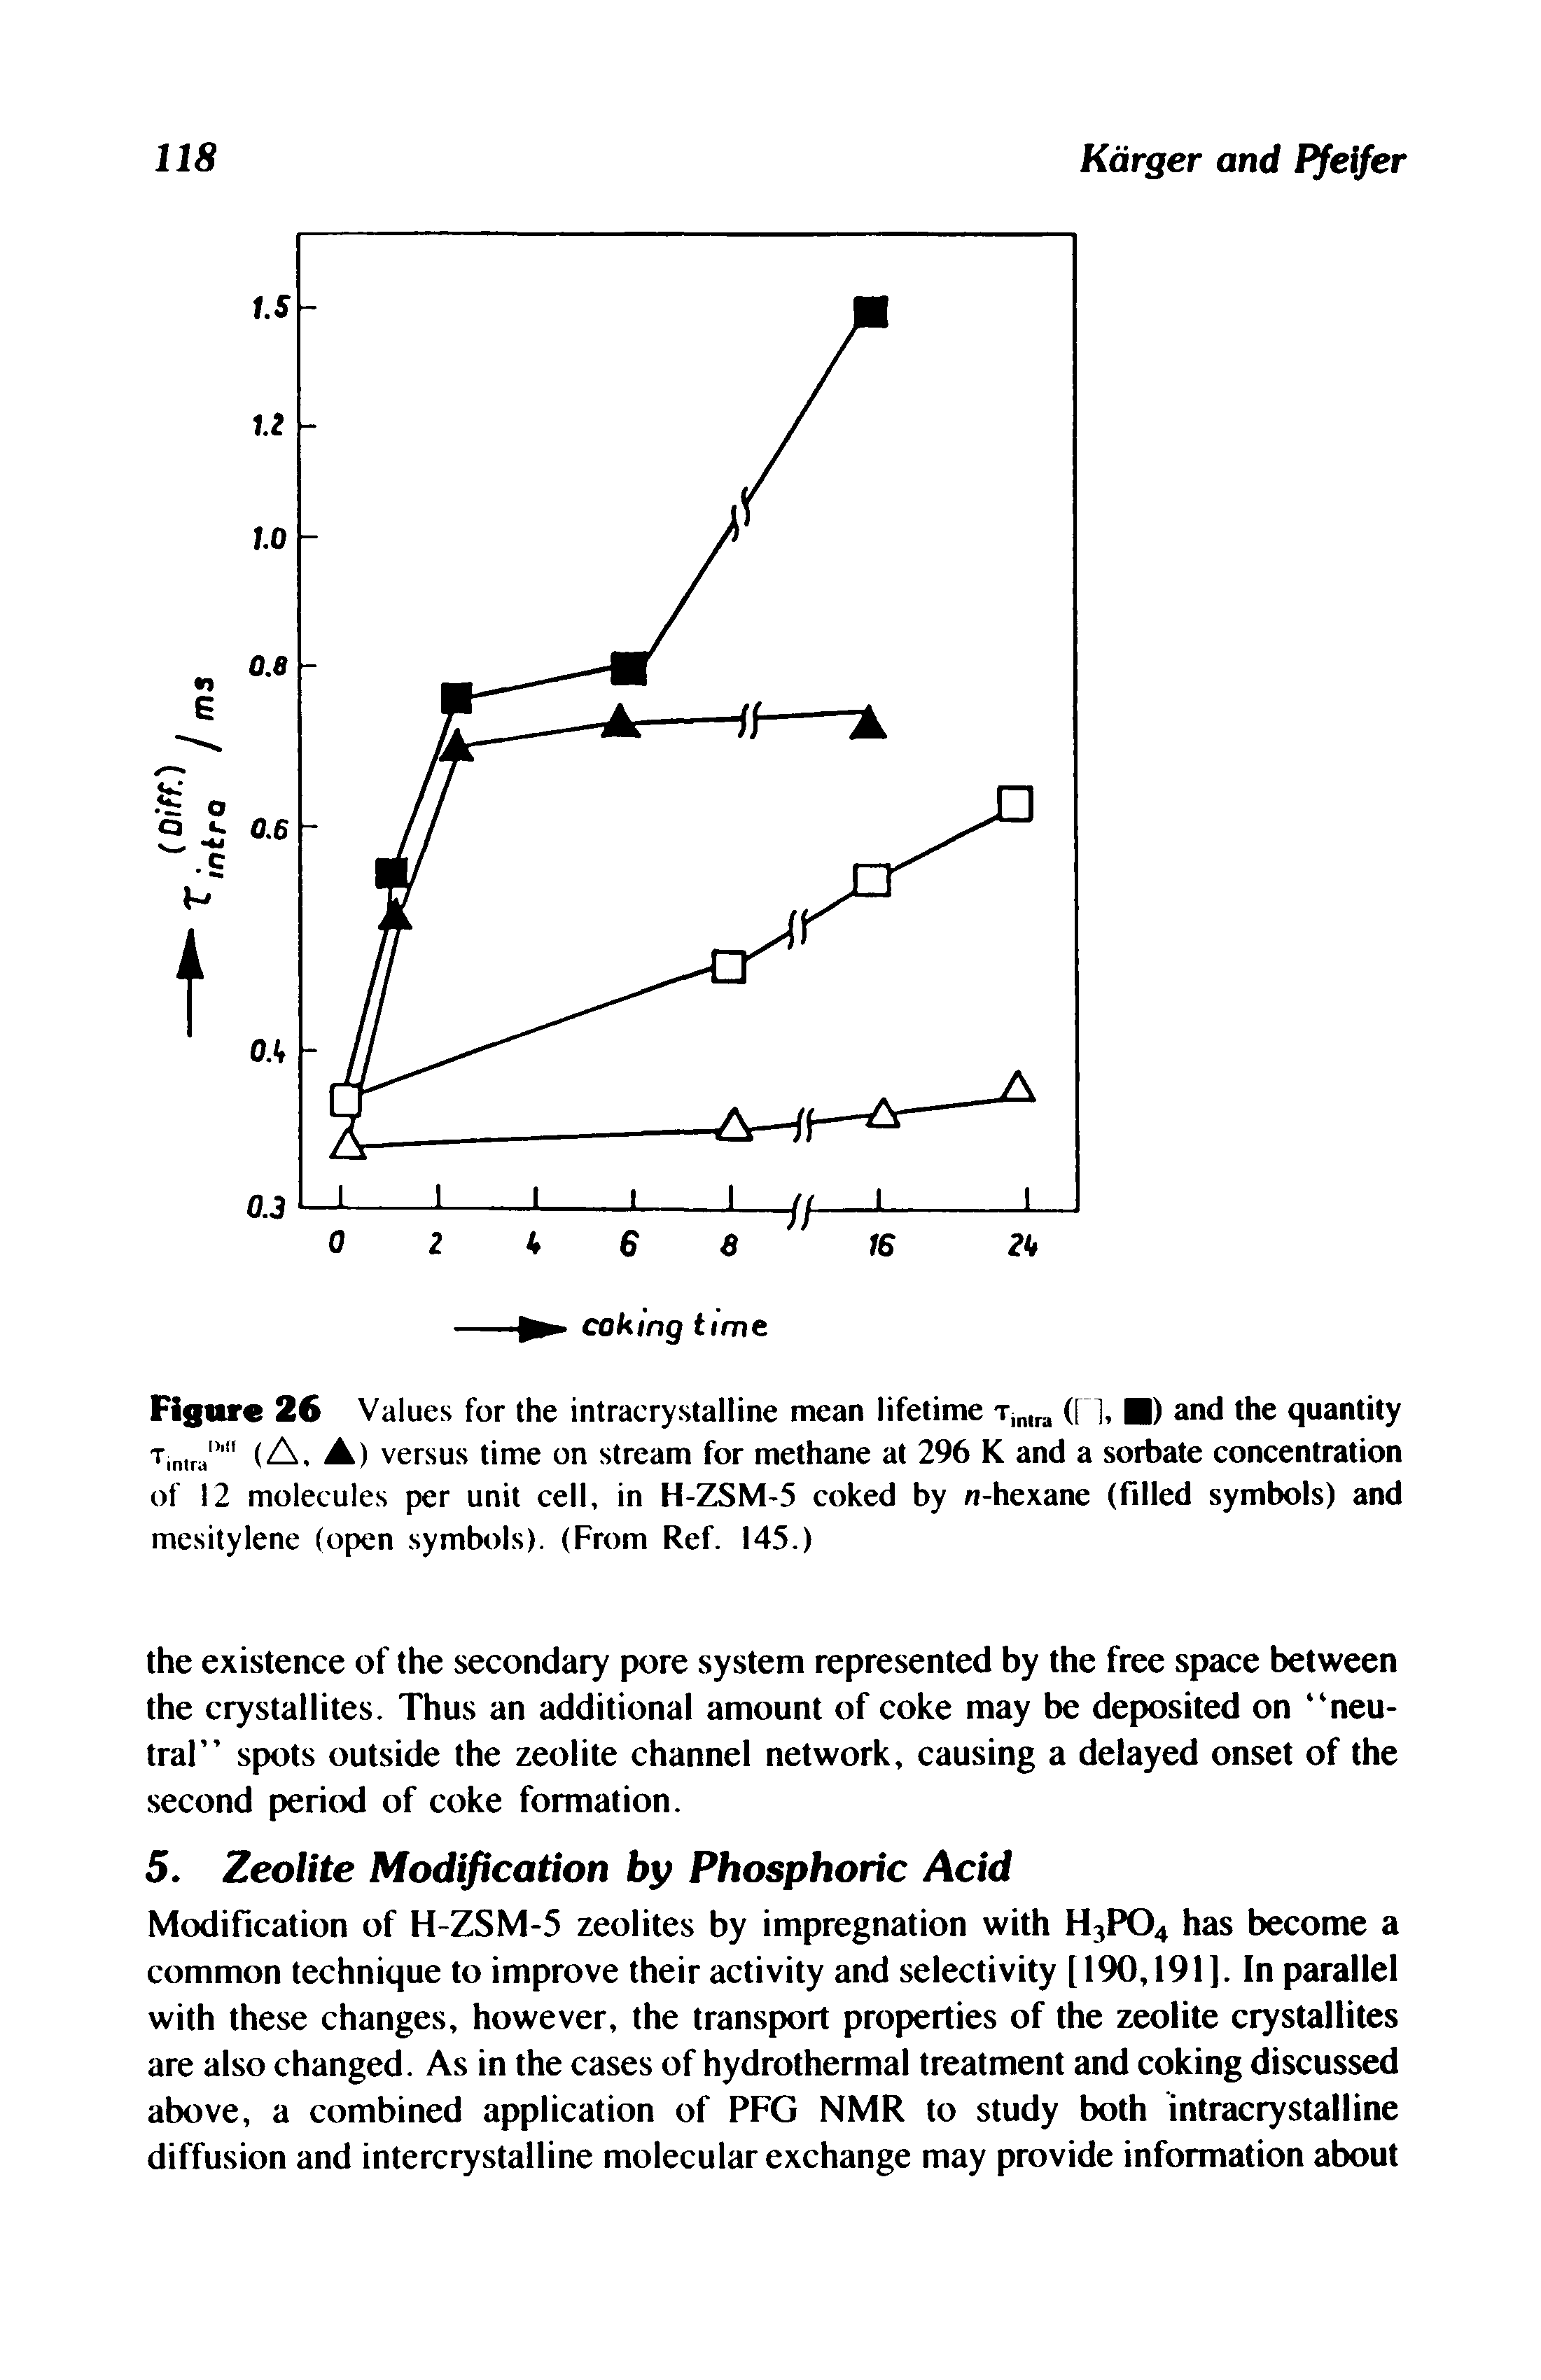 Figure 26 Values for the intracrystalline mean lifetime Tjn, (f l, ) and the quantity T n,r " (A. A) versus time on stream for methane at 296 K and a sorbate concentration of 12 molecules per unit cell, in H-ZSM-5 coked by n-hexane (Filled symbols) and mesitylene (open symbols). (From Ref. 145.)...